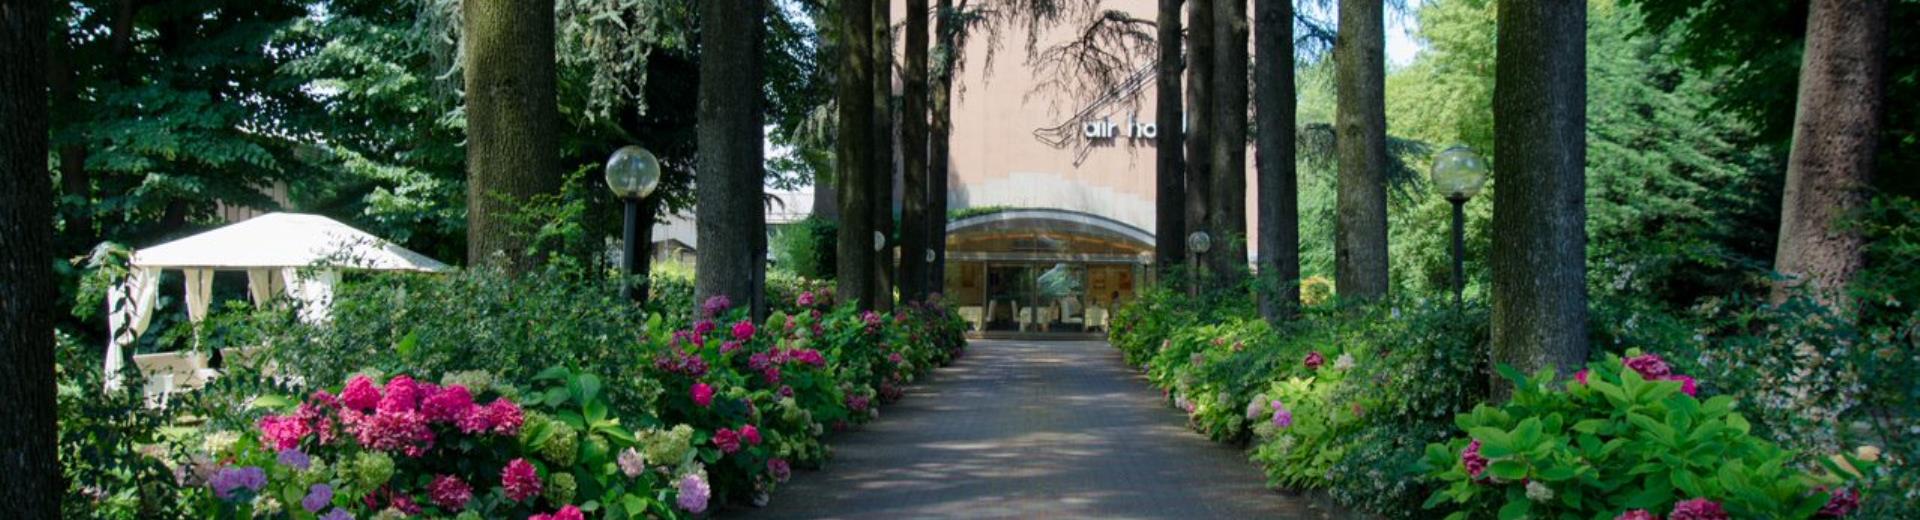 The BW Air Hotel Linate is just 500 metres from Milano Linate airport, in the countryside, for a stay of comfort and relaxation.